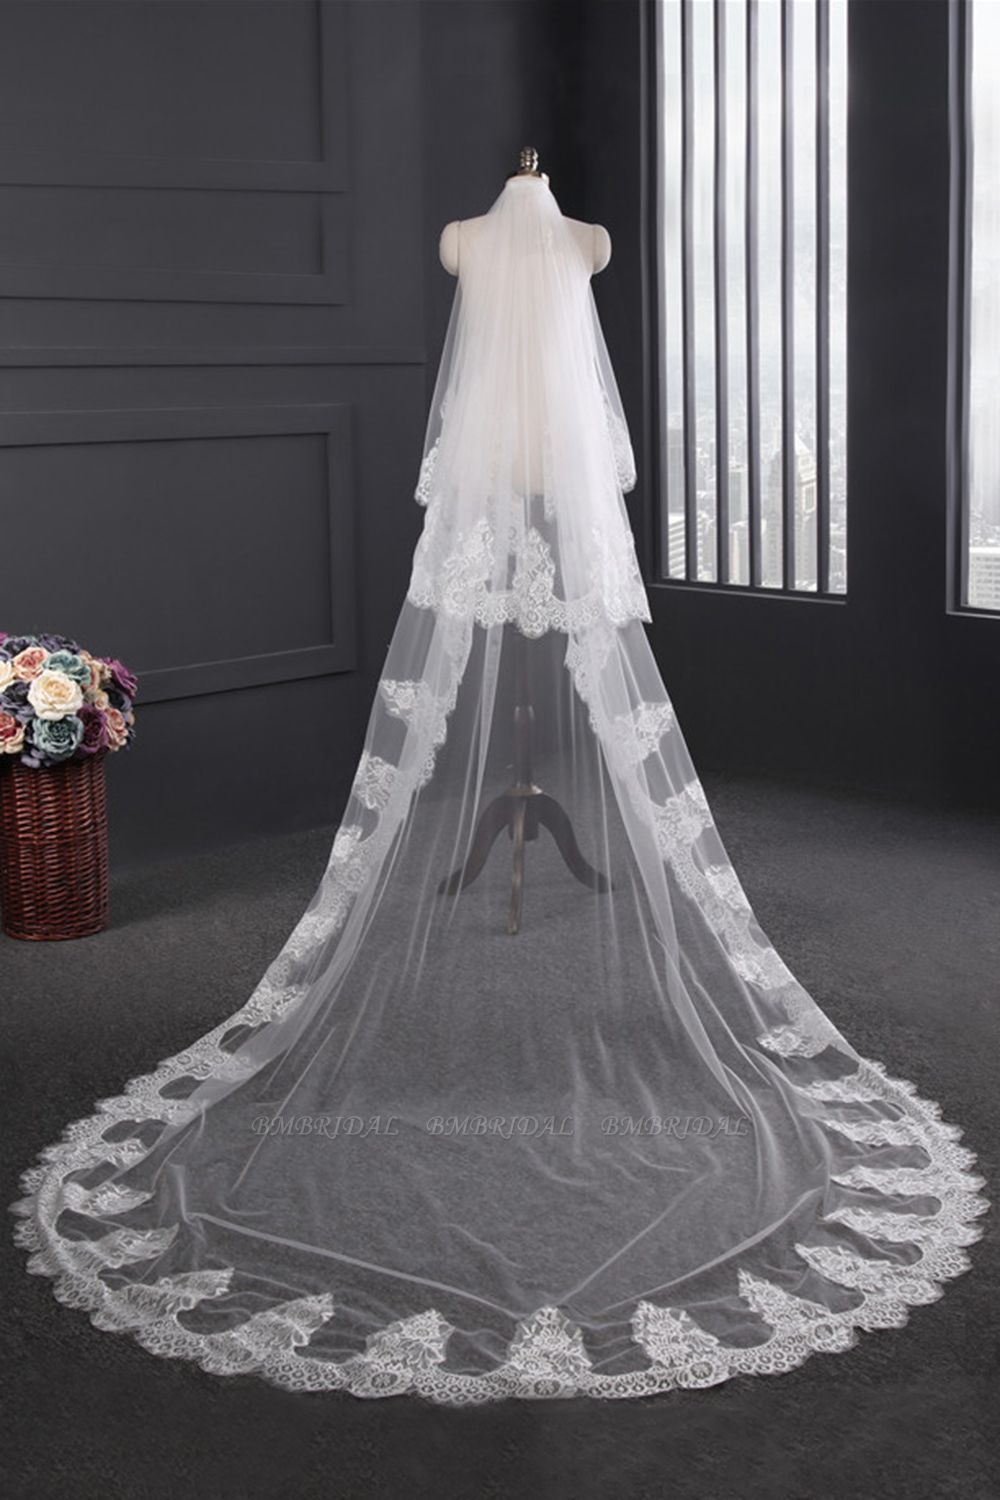 BMbridal Gorgrous Cathedral Tulle Scalloped Edge Wedding Veil with Appliques